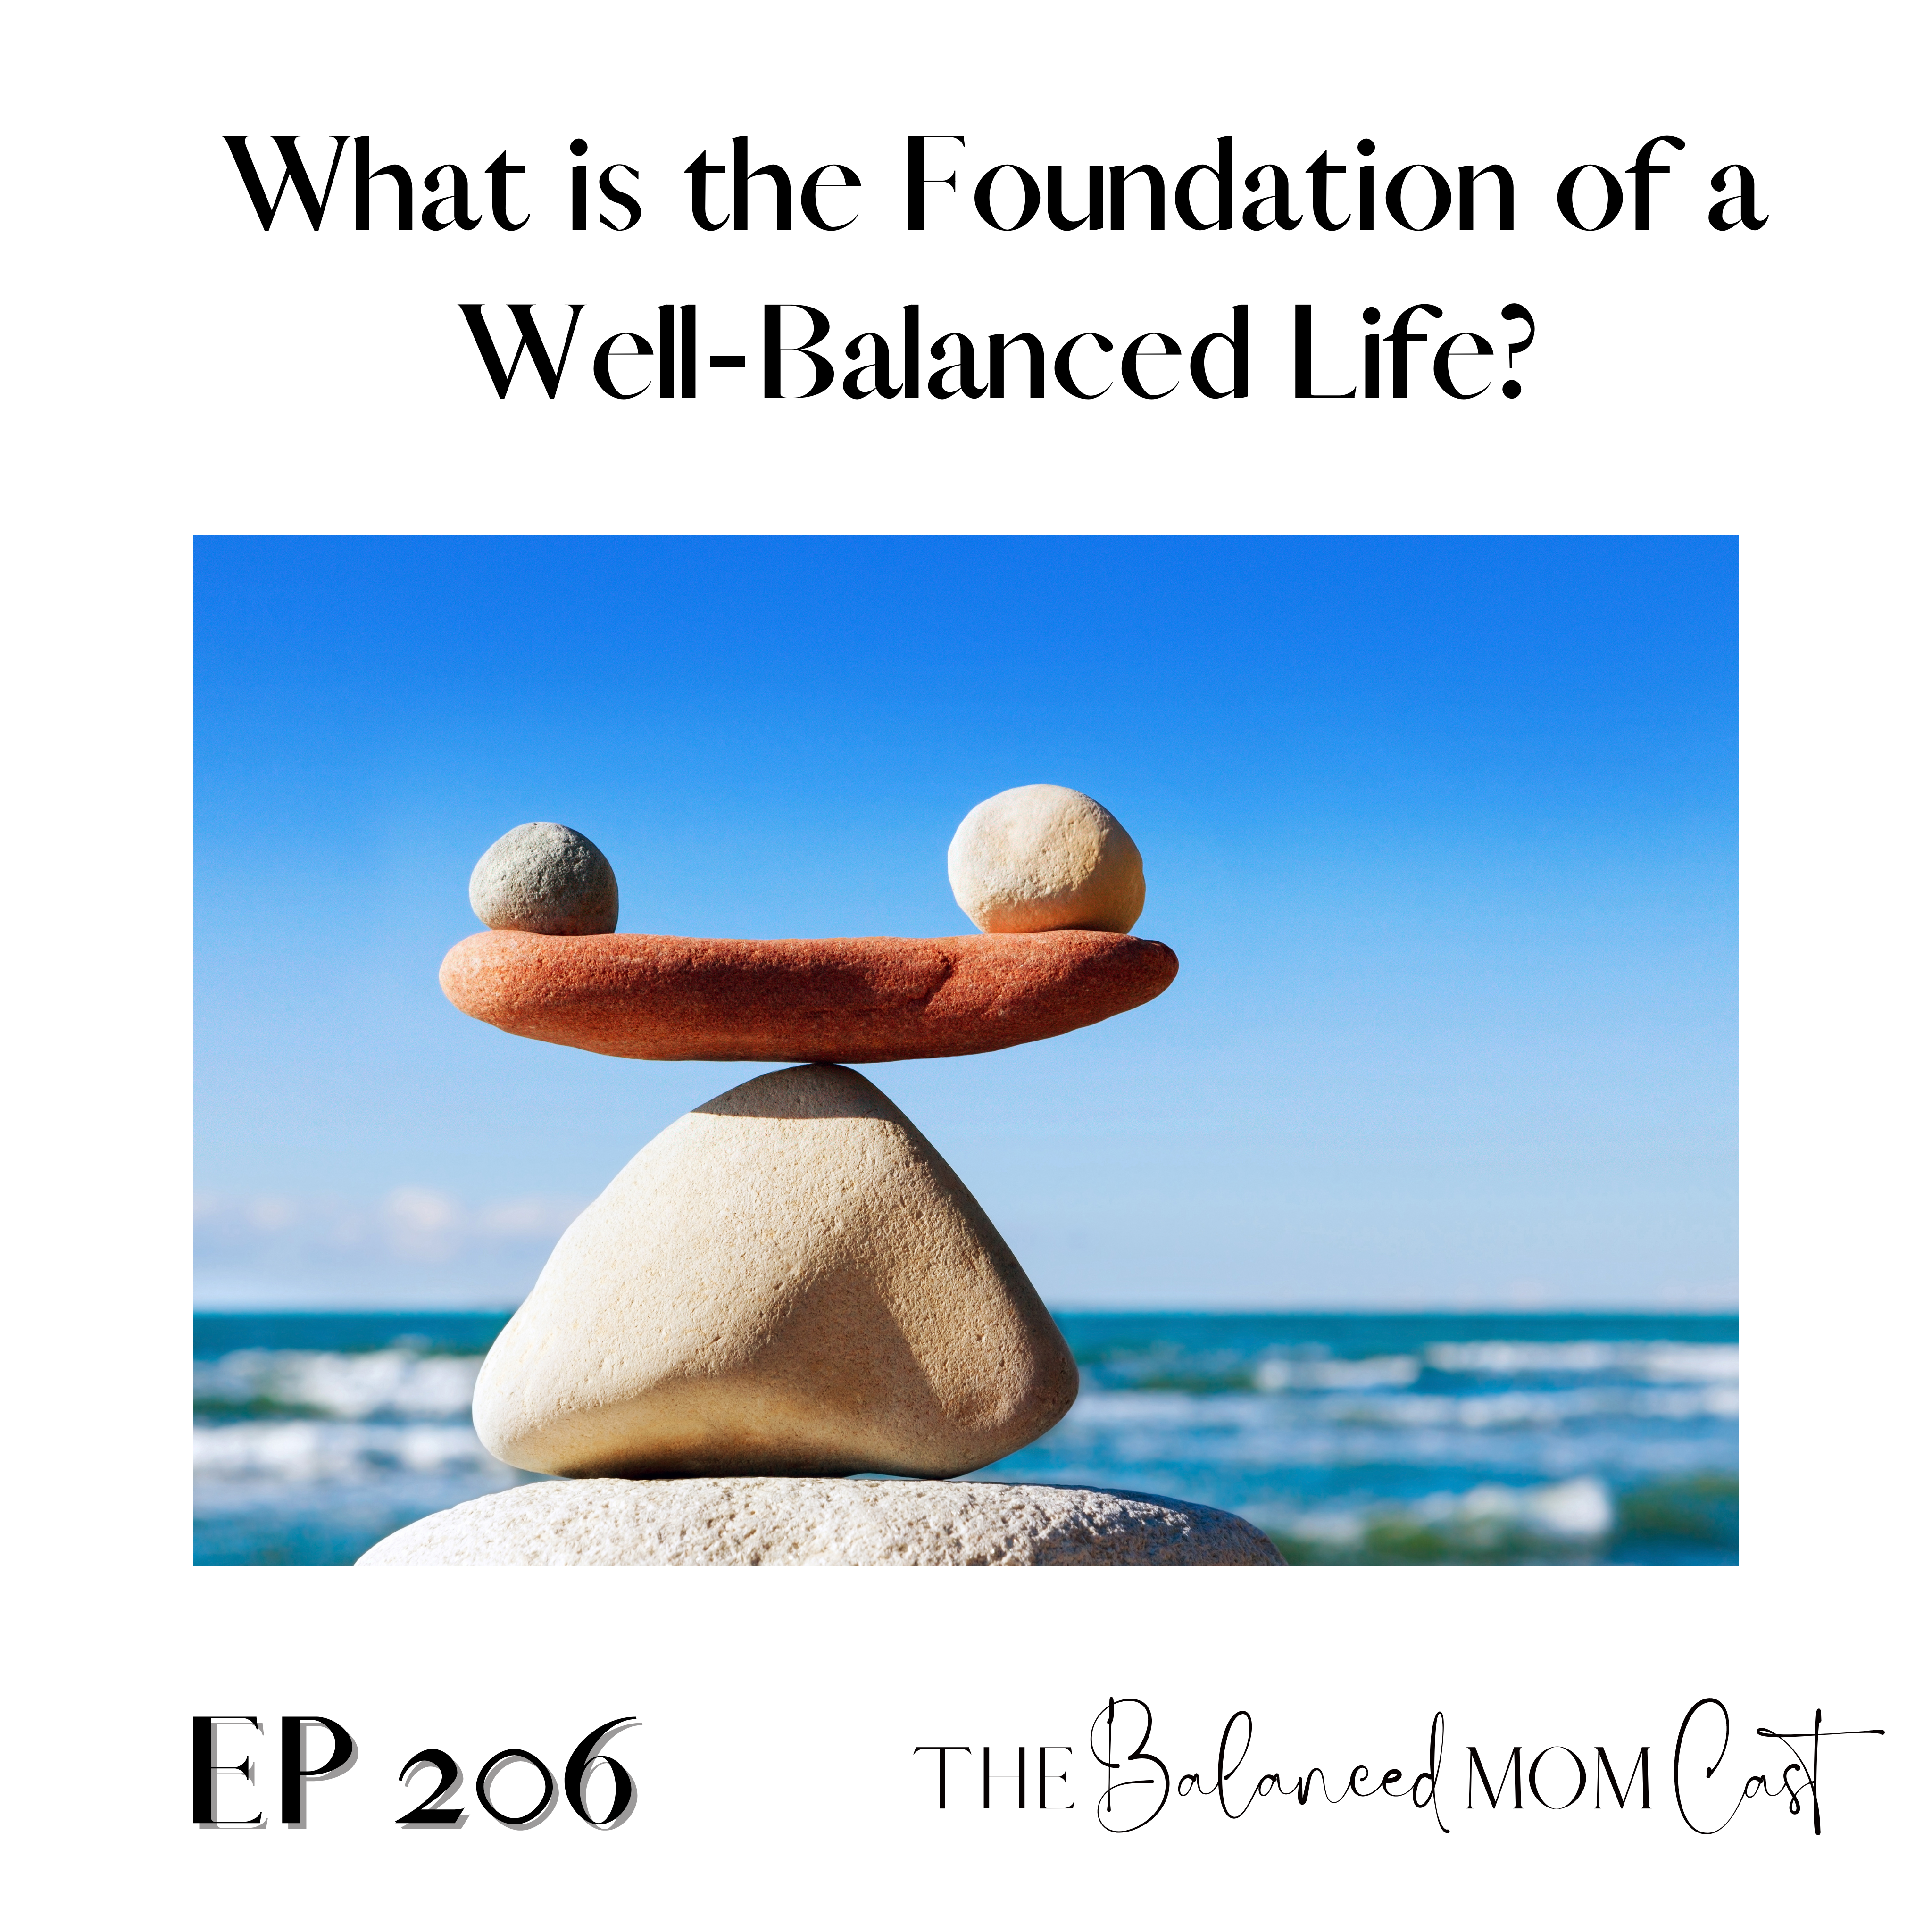 Ep 206: What is the Foundation of a Well-Balanced Life?